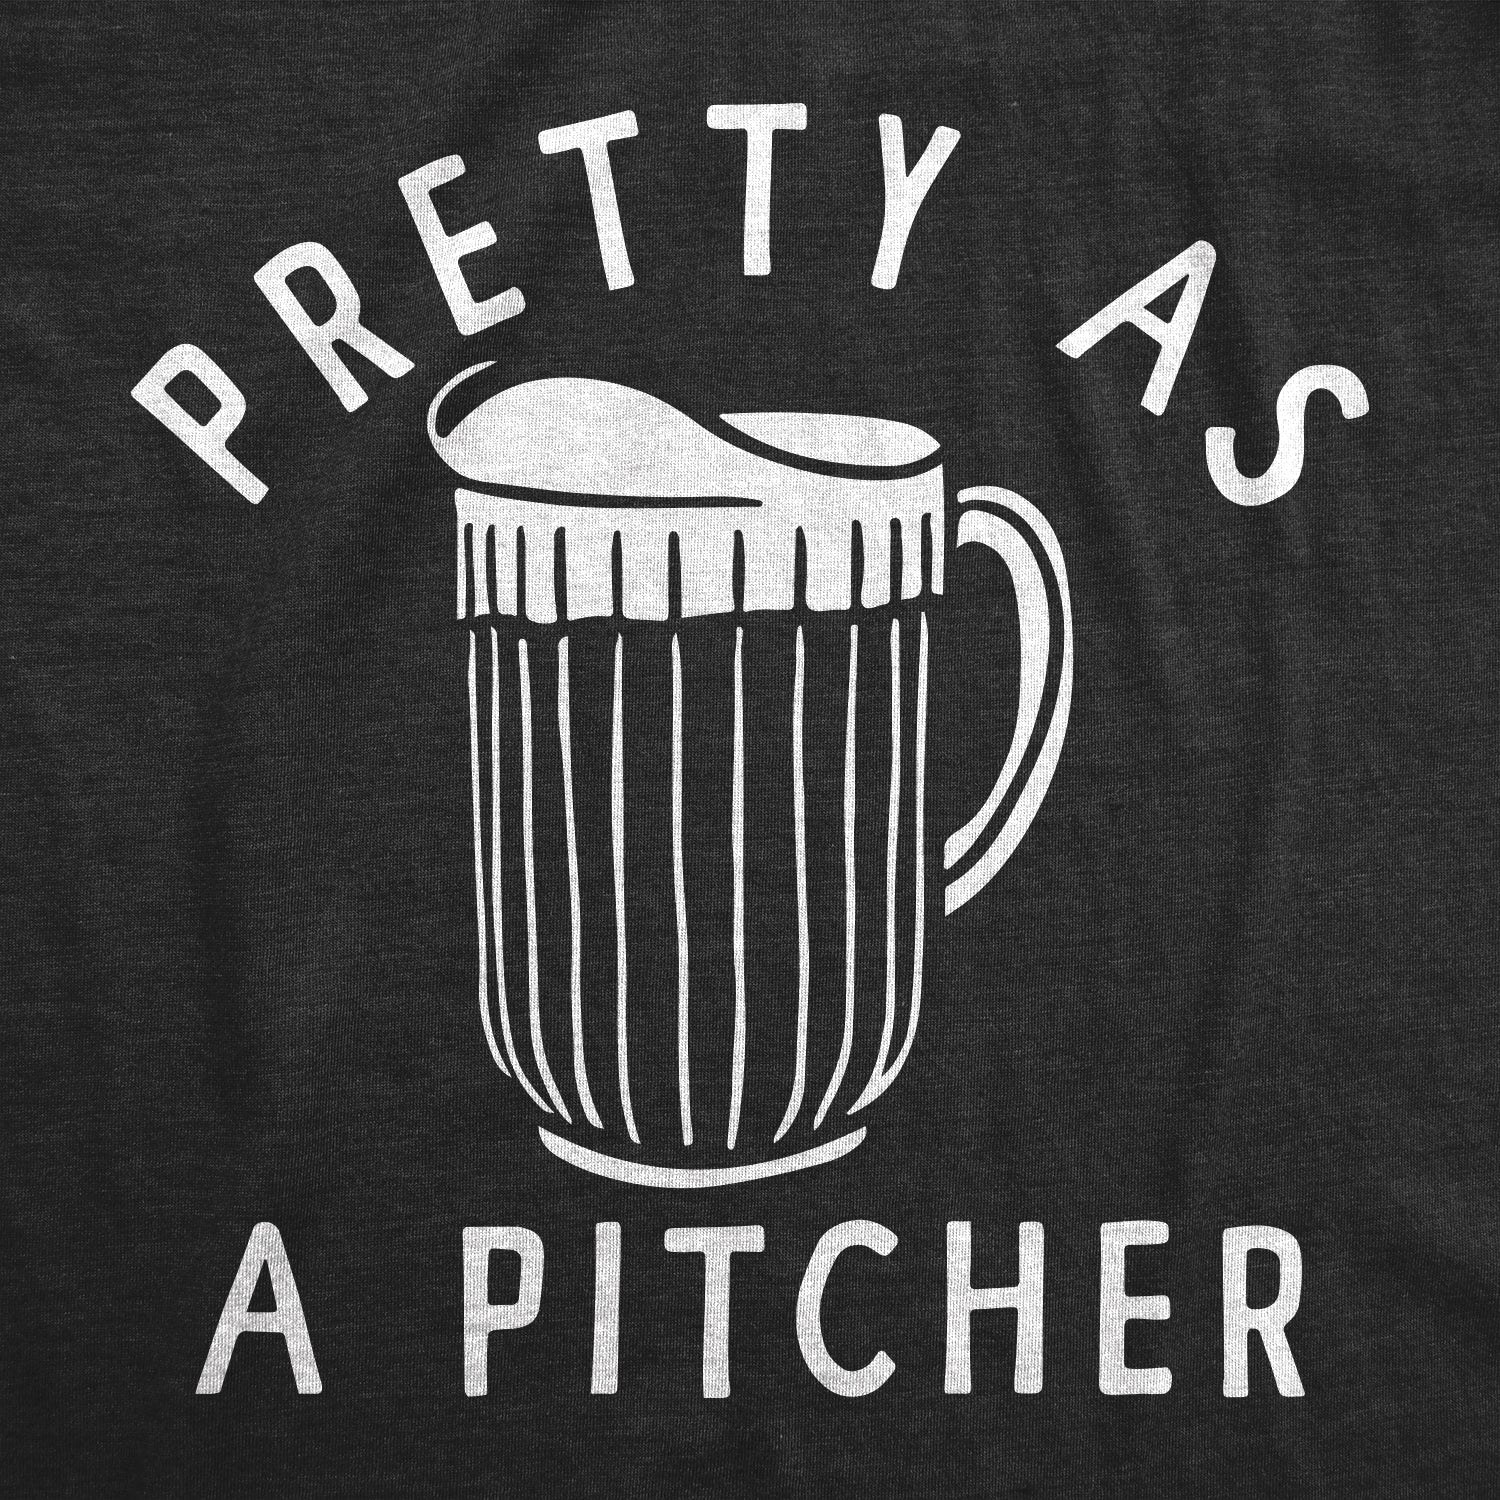 Funny Heather Black - PITCHER Pretty As A Pitcher Womens T Shirt Nerdy Beer Drinking Tee